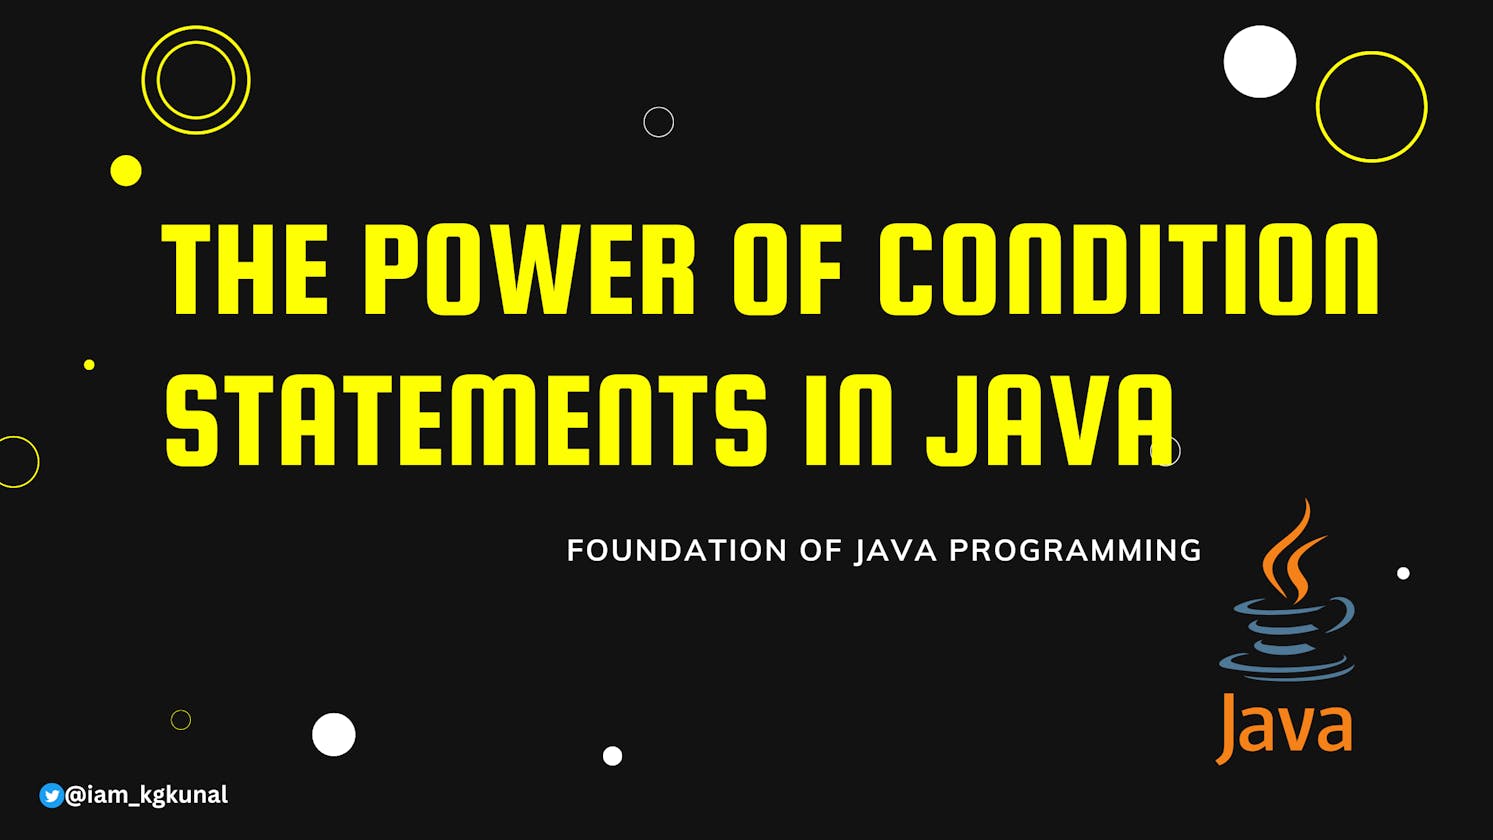 The Power of Condition Statements in Java